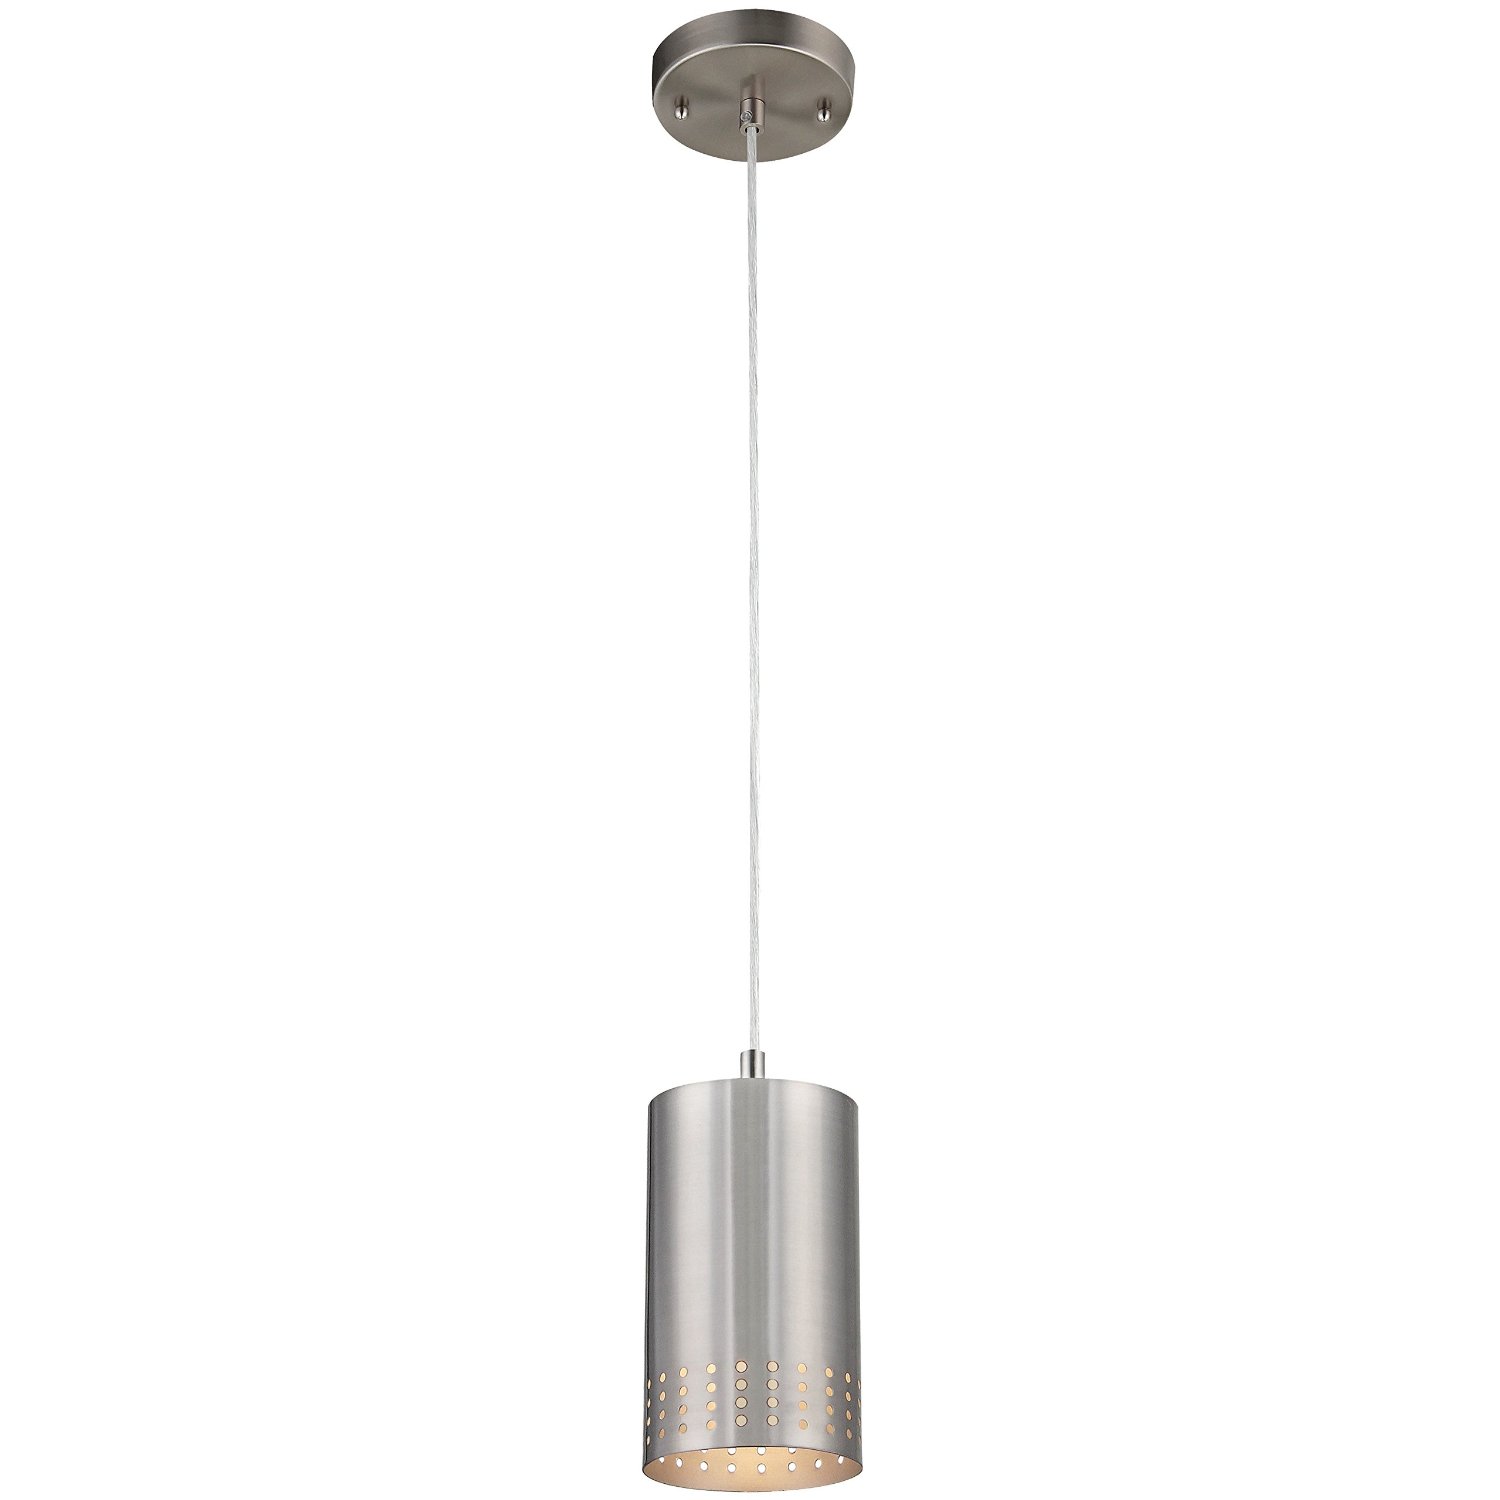 Westinghouse 6101200 Contemporary One-Light Adjustable Mini Pendant with Perforated Cylindrical Metal Shade, Brushed Nickel Finish